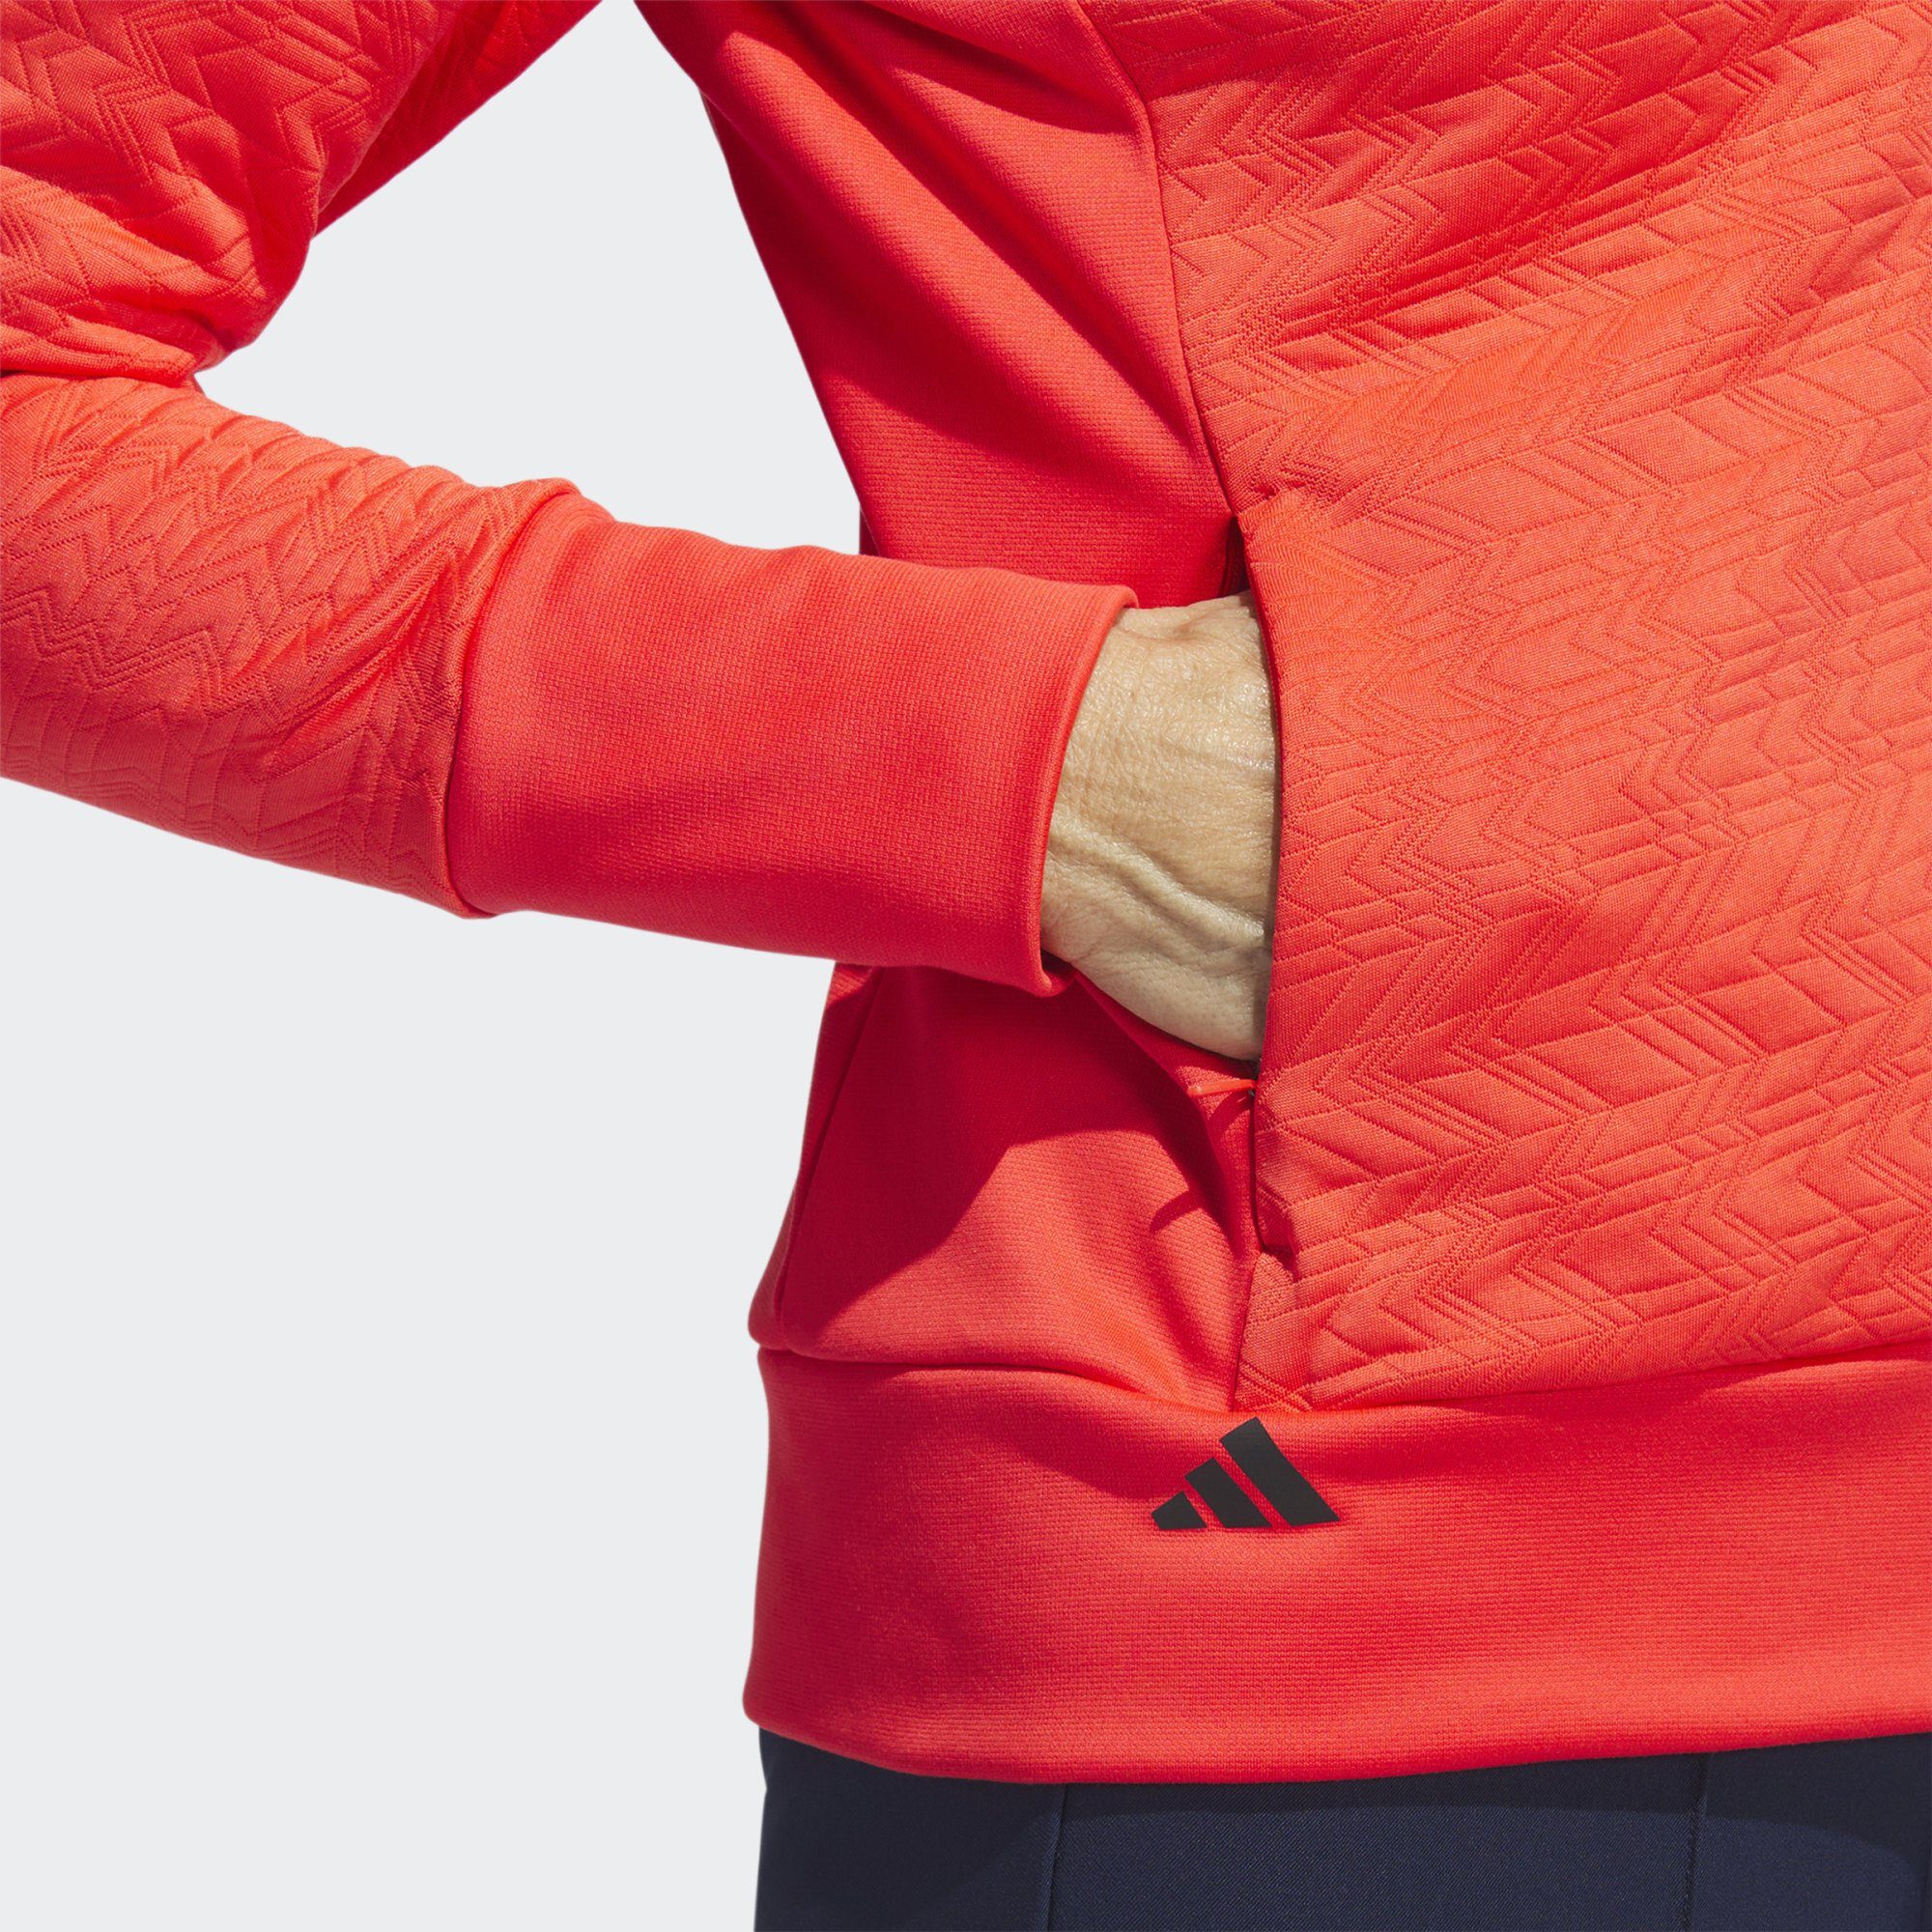 Red COLD.RDY Performance Funktionsjacke JACKE Bright adidas